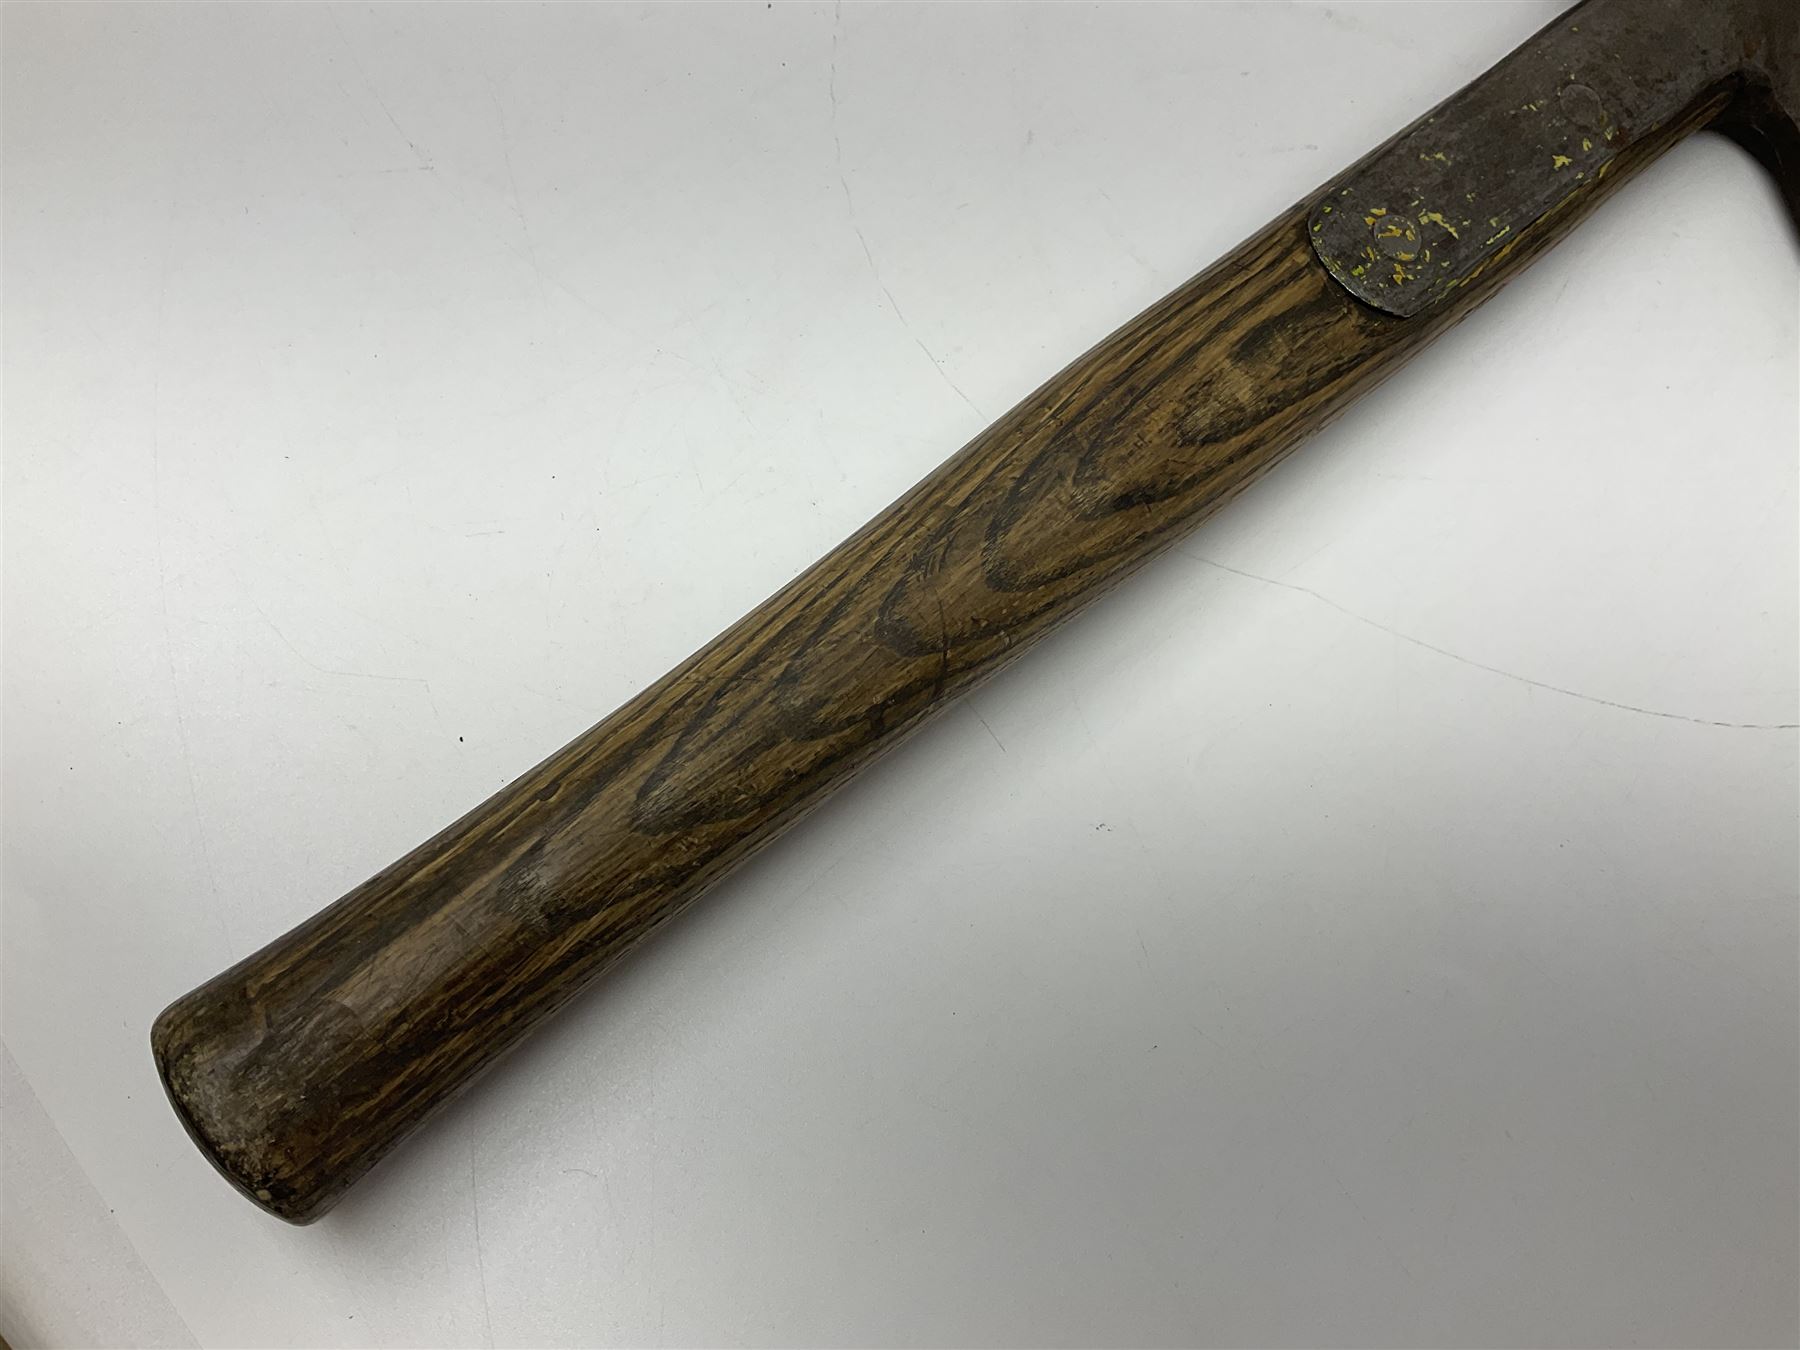 Post-War military type fireman's axe impressed 'PERKS 1953/54' with additional indistinct mark proba - Image 16 of 19